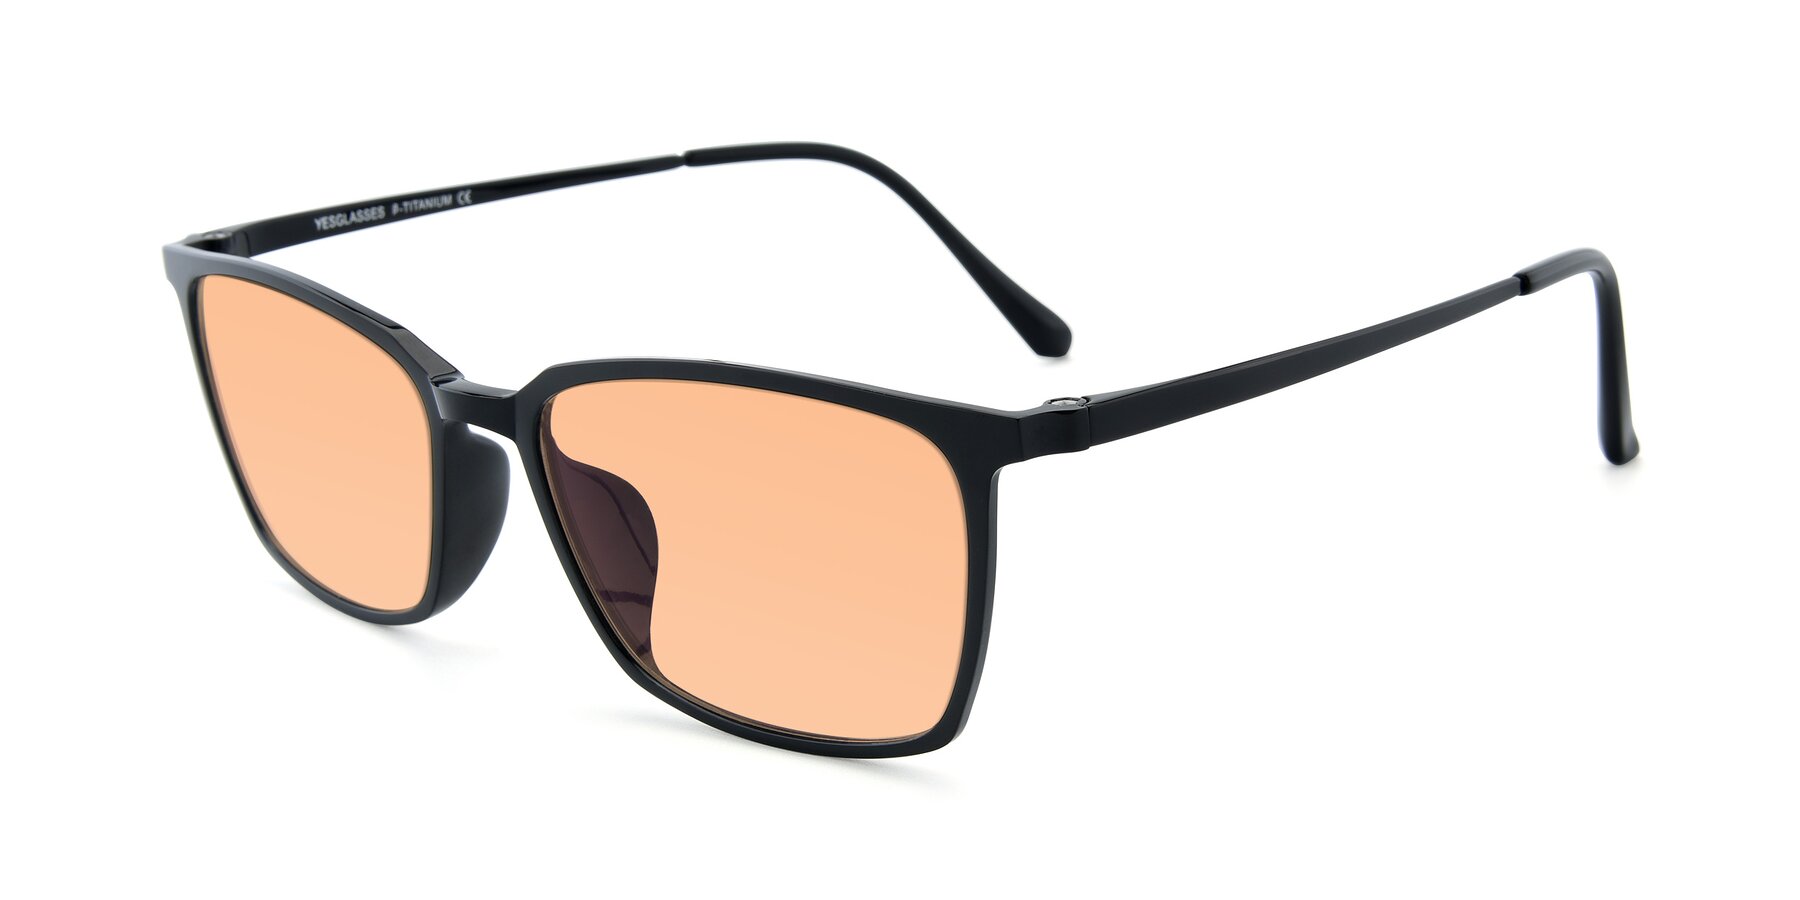 Angle of XC-5009 in Black with Light Orange Tinted Lenses